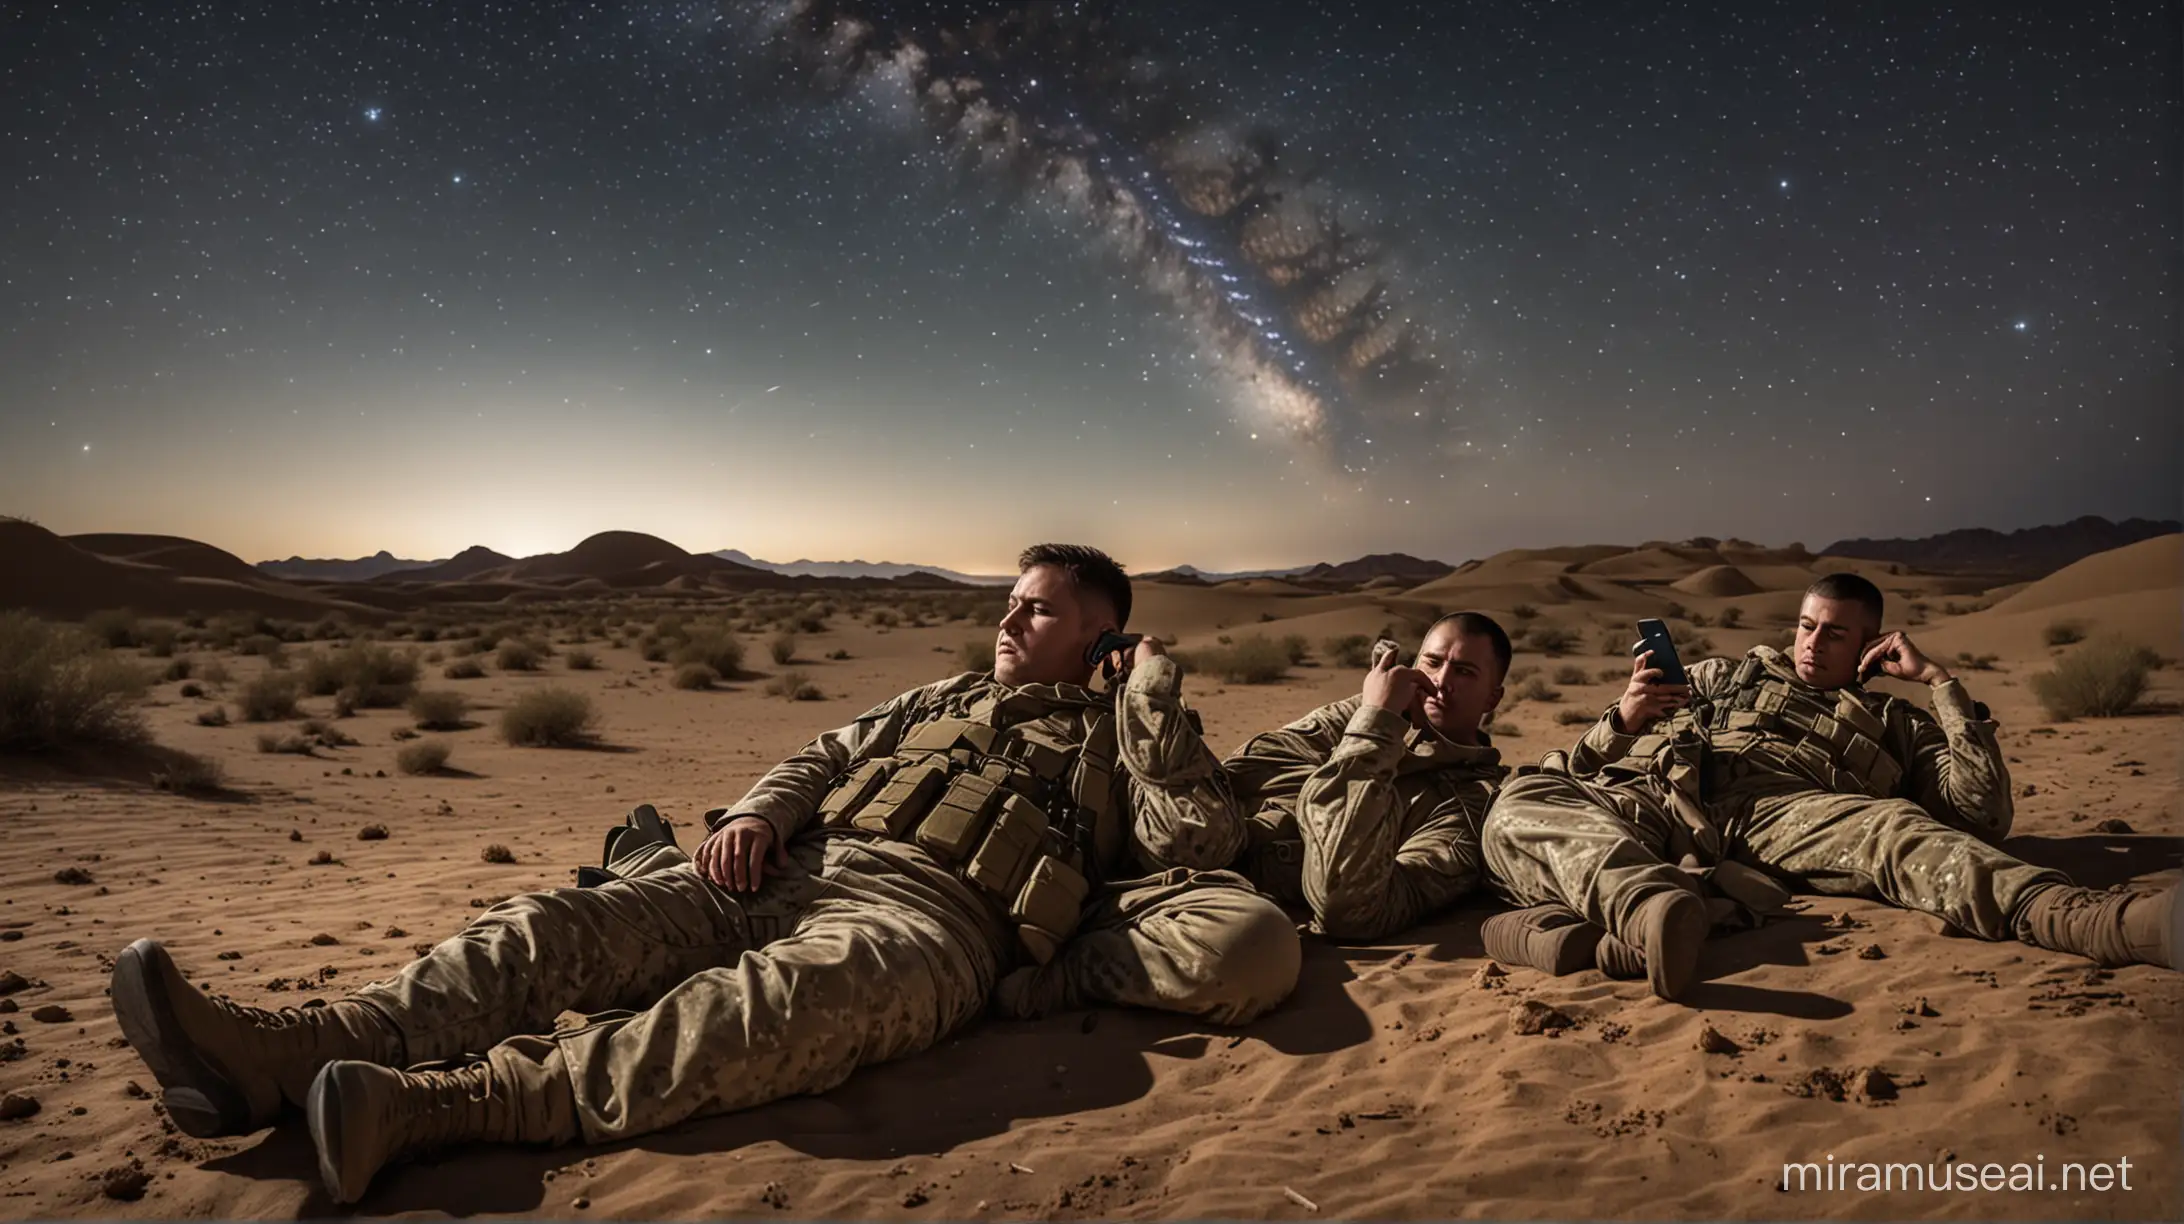 three soldiers sleeping on ground in desert they are looking to a lot of stars at night,
one of them using his phone, second one is fat, third one sitting between them pointing at sky
